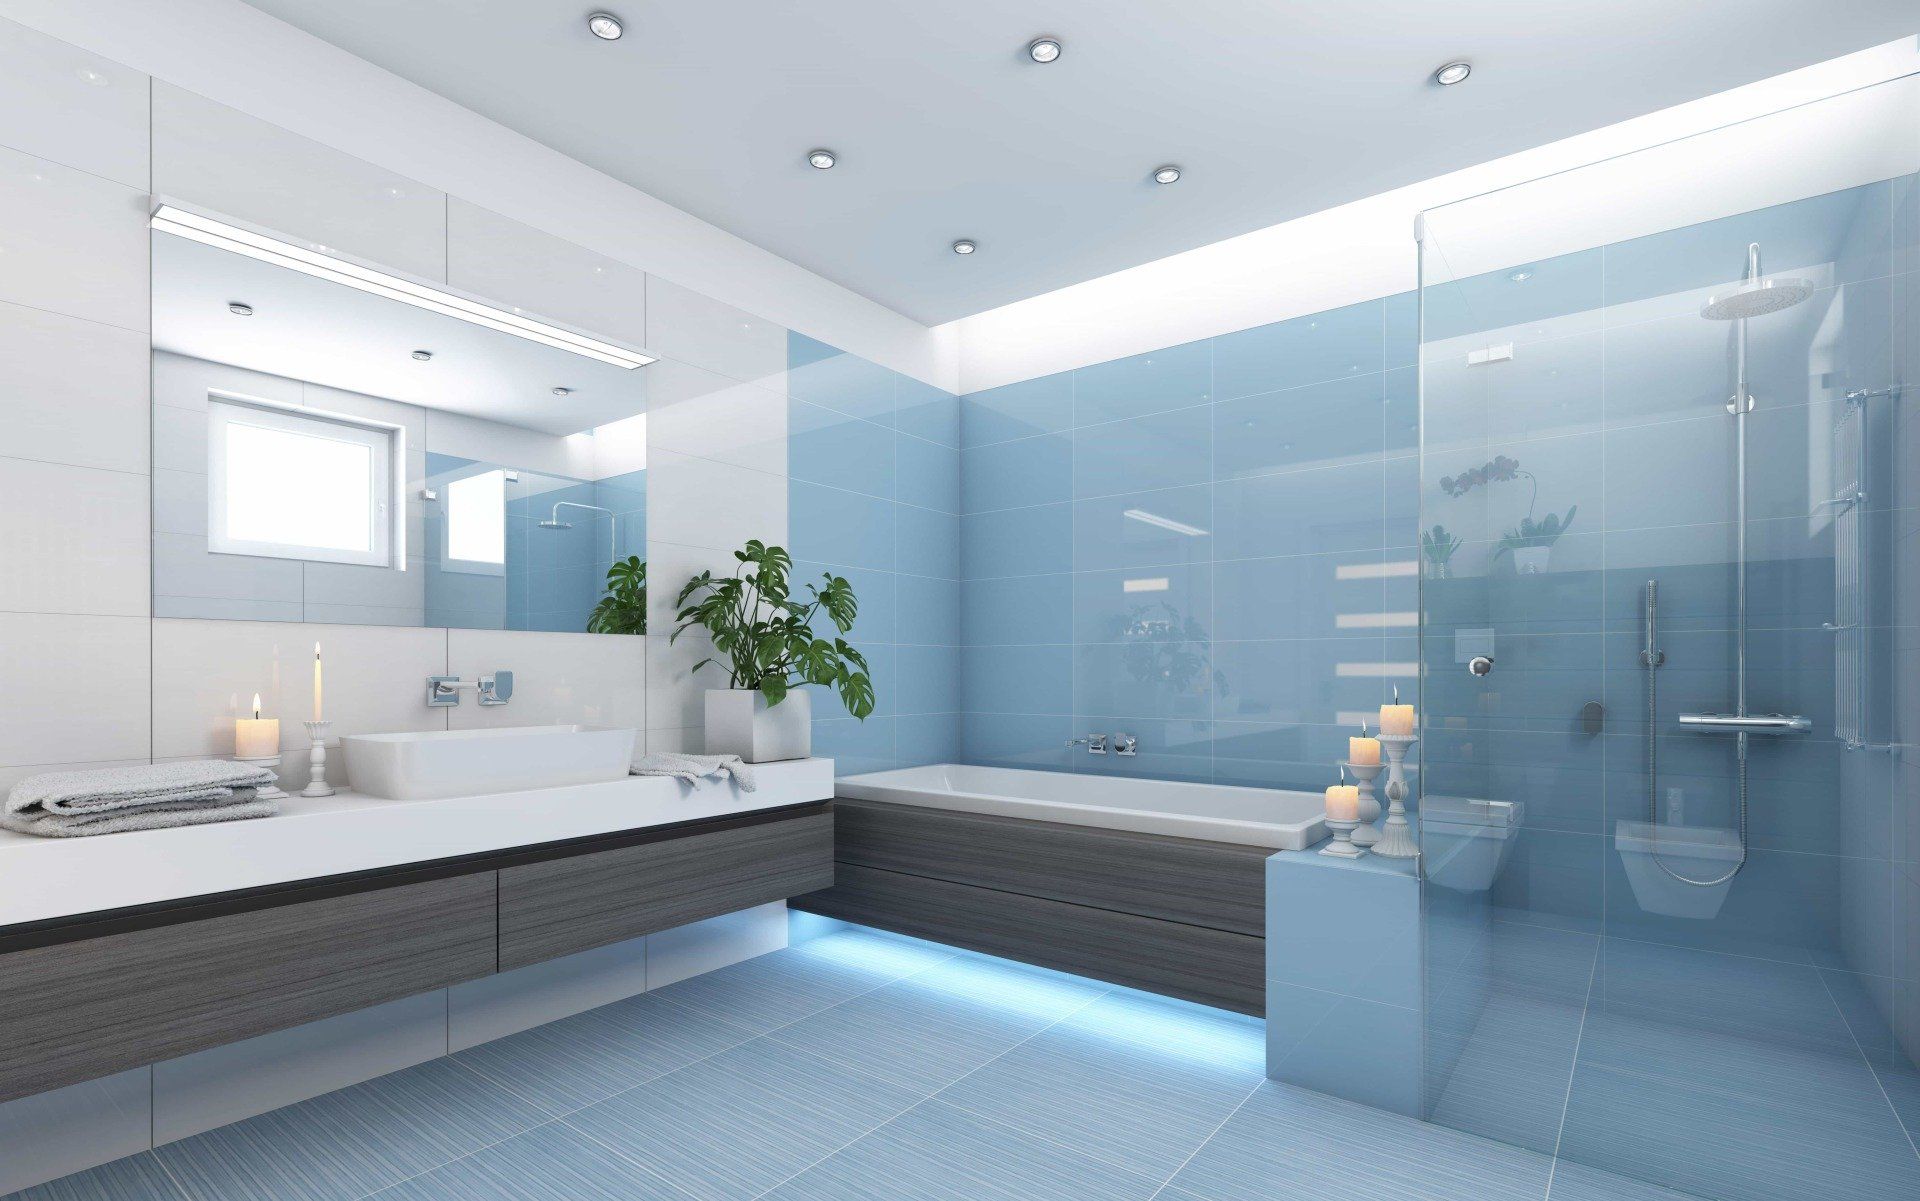 frameless shower door and enclosure with blue lit wall in background